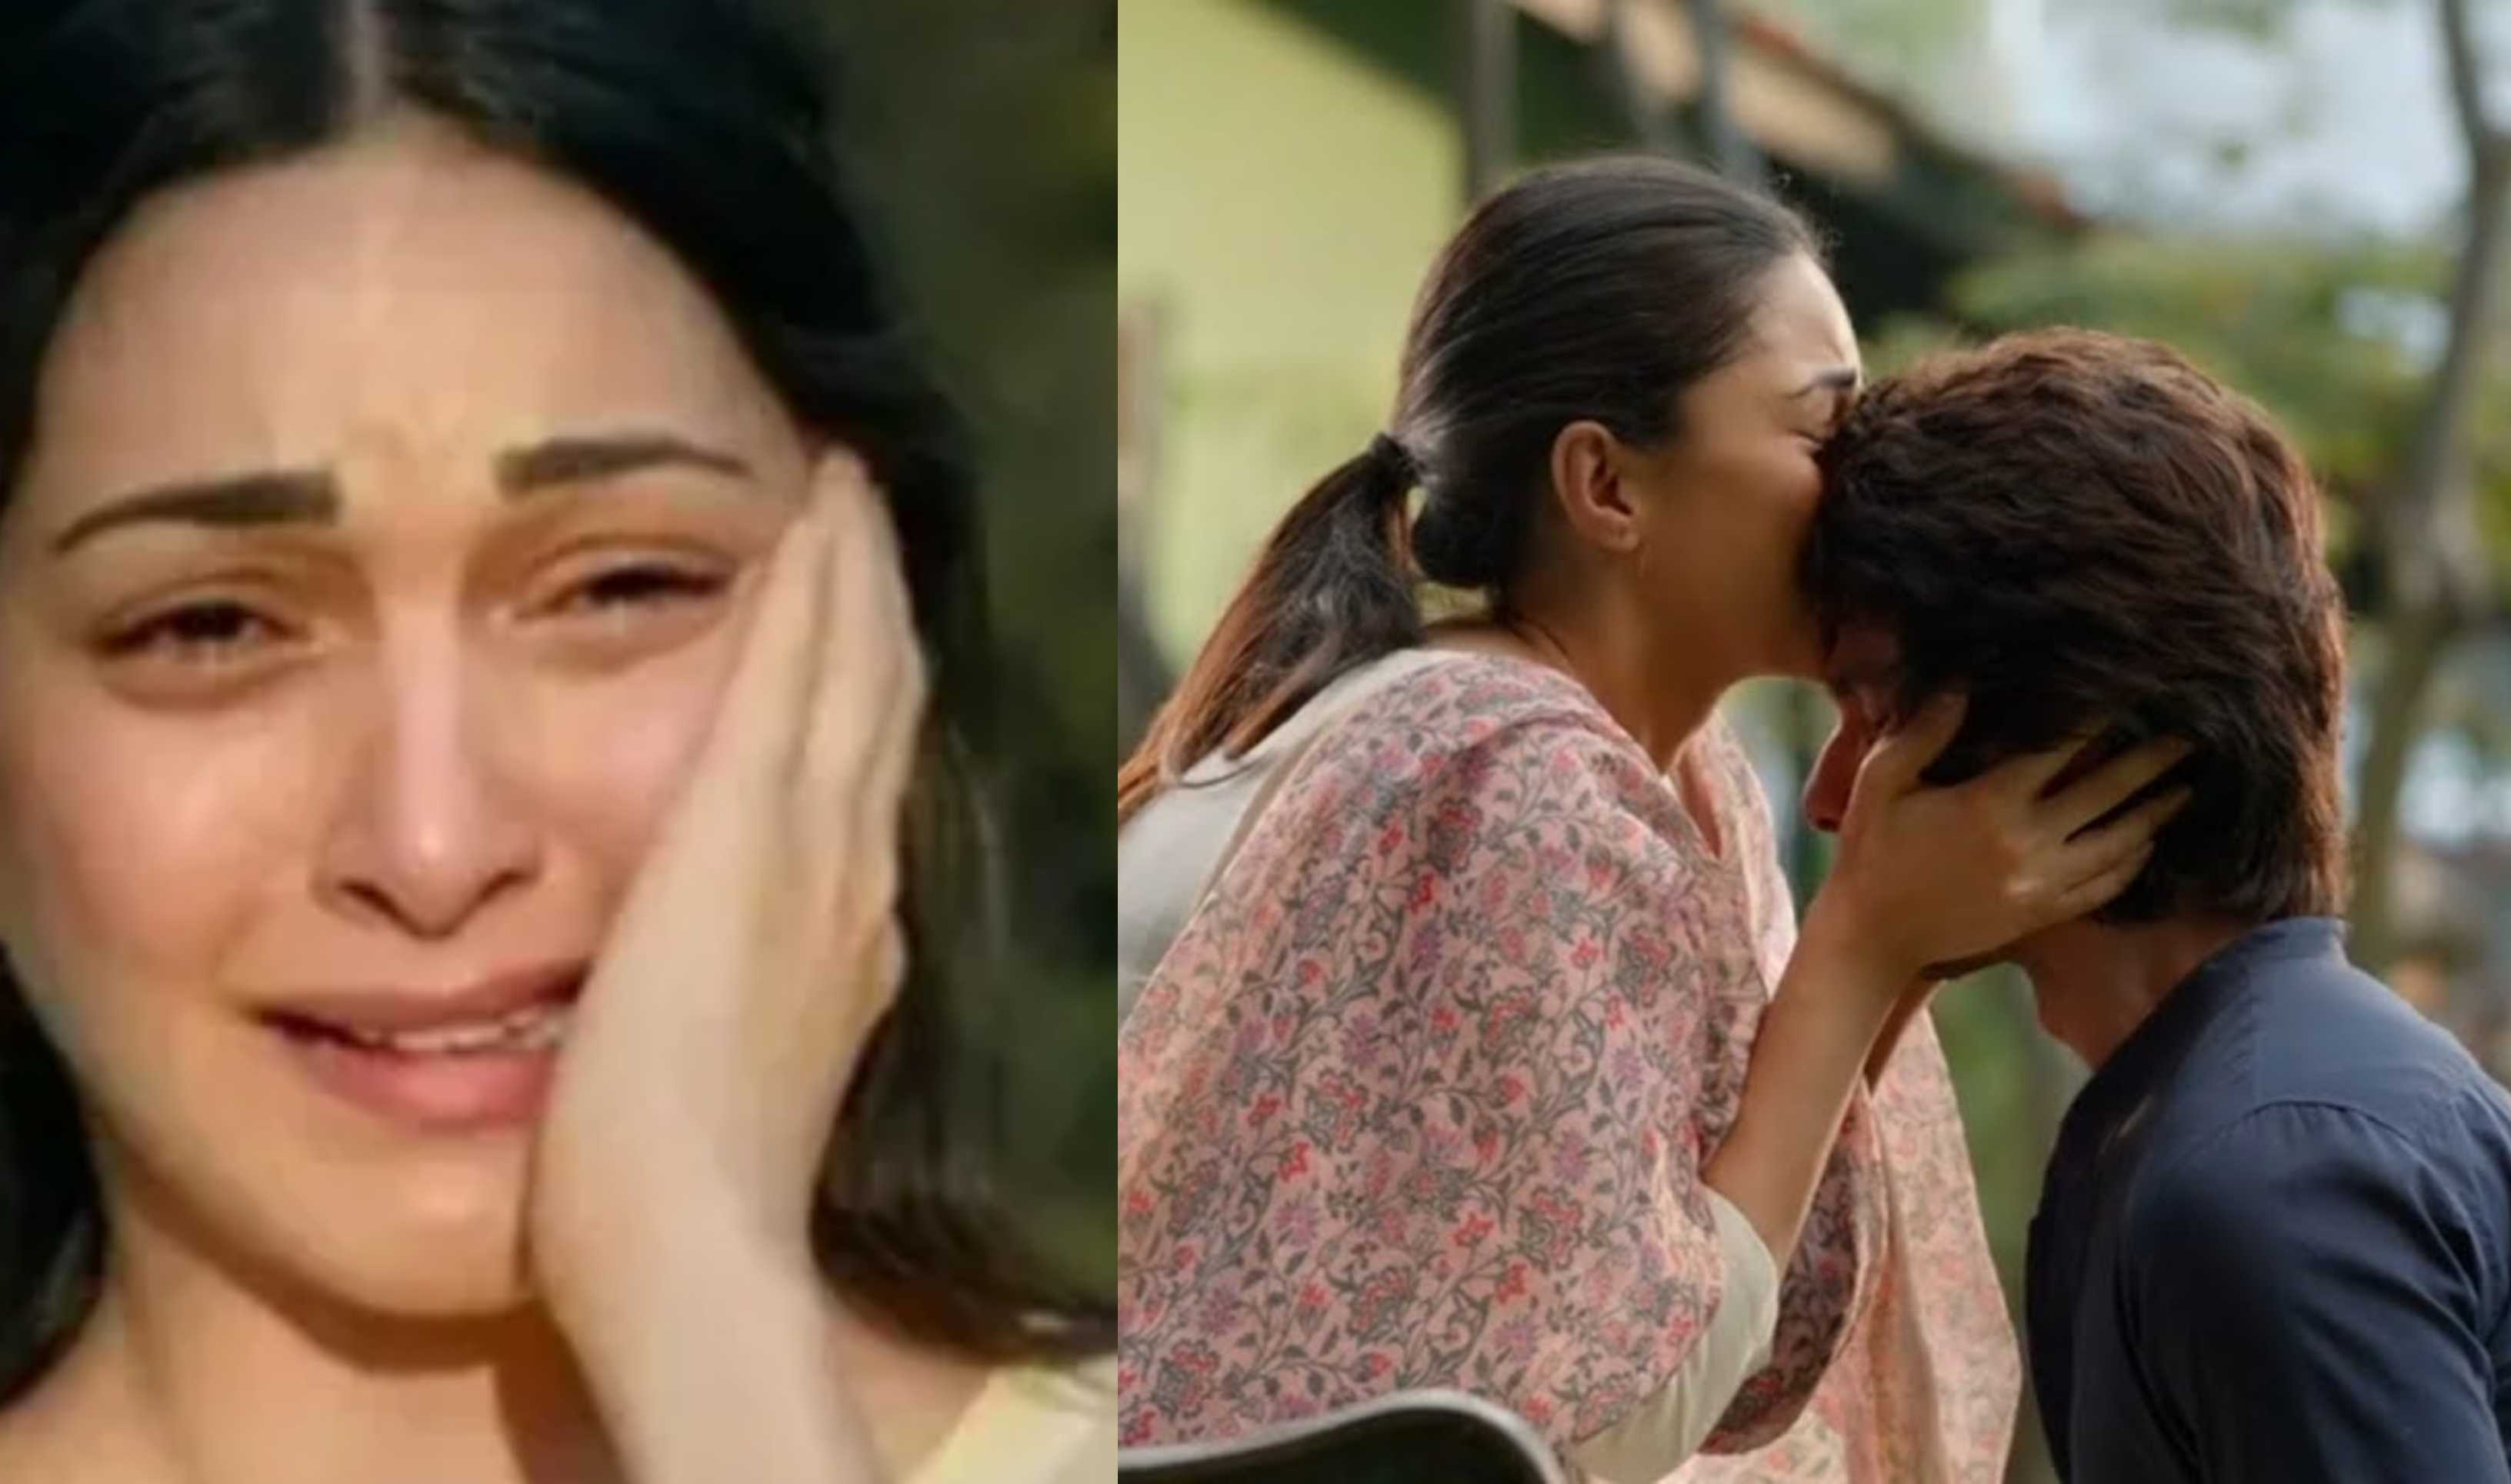 Kiara Advani on Kabir Singh’s infamous slap scene: ‘At the end of the day this is the love of her life; she gives in’